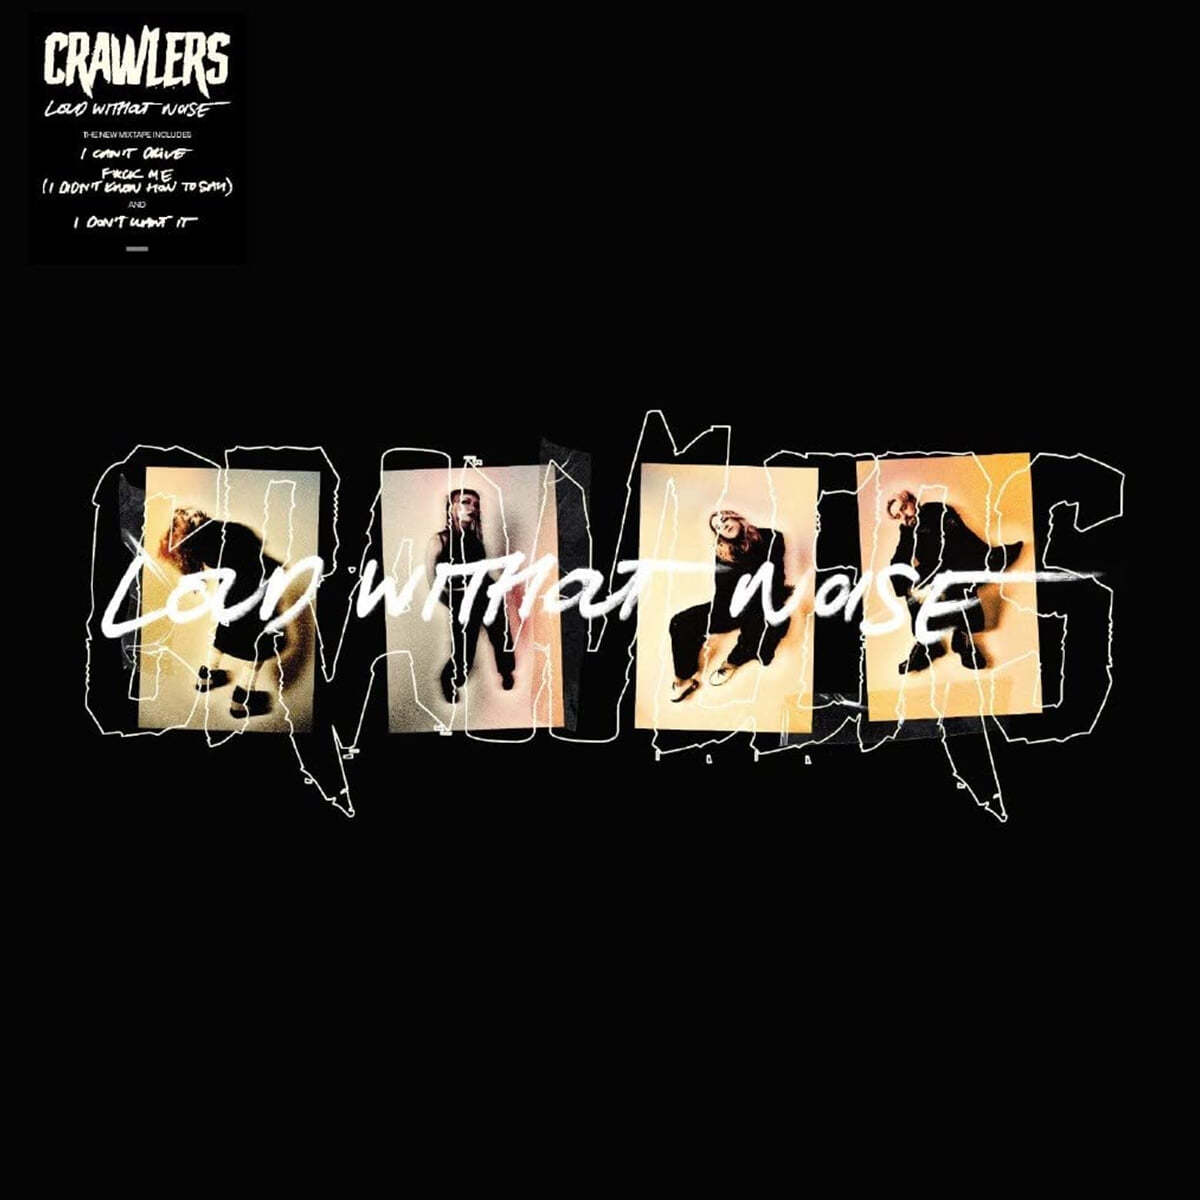 Crawlers (크롤러스) - Without Noise [LP]